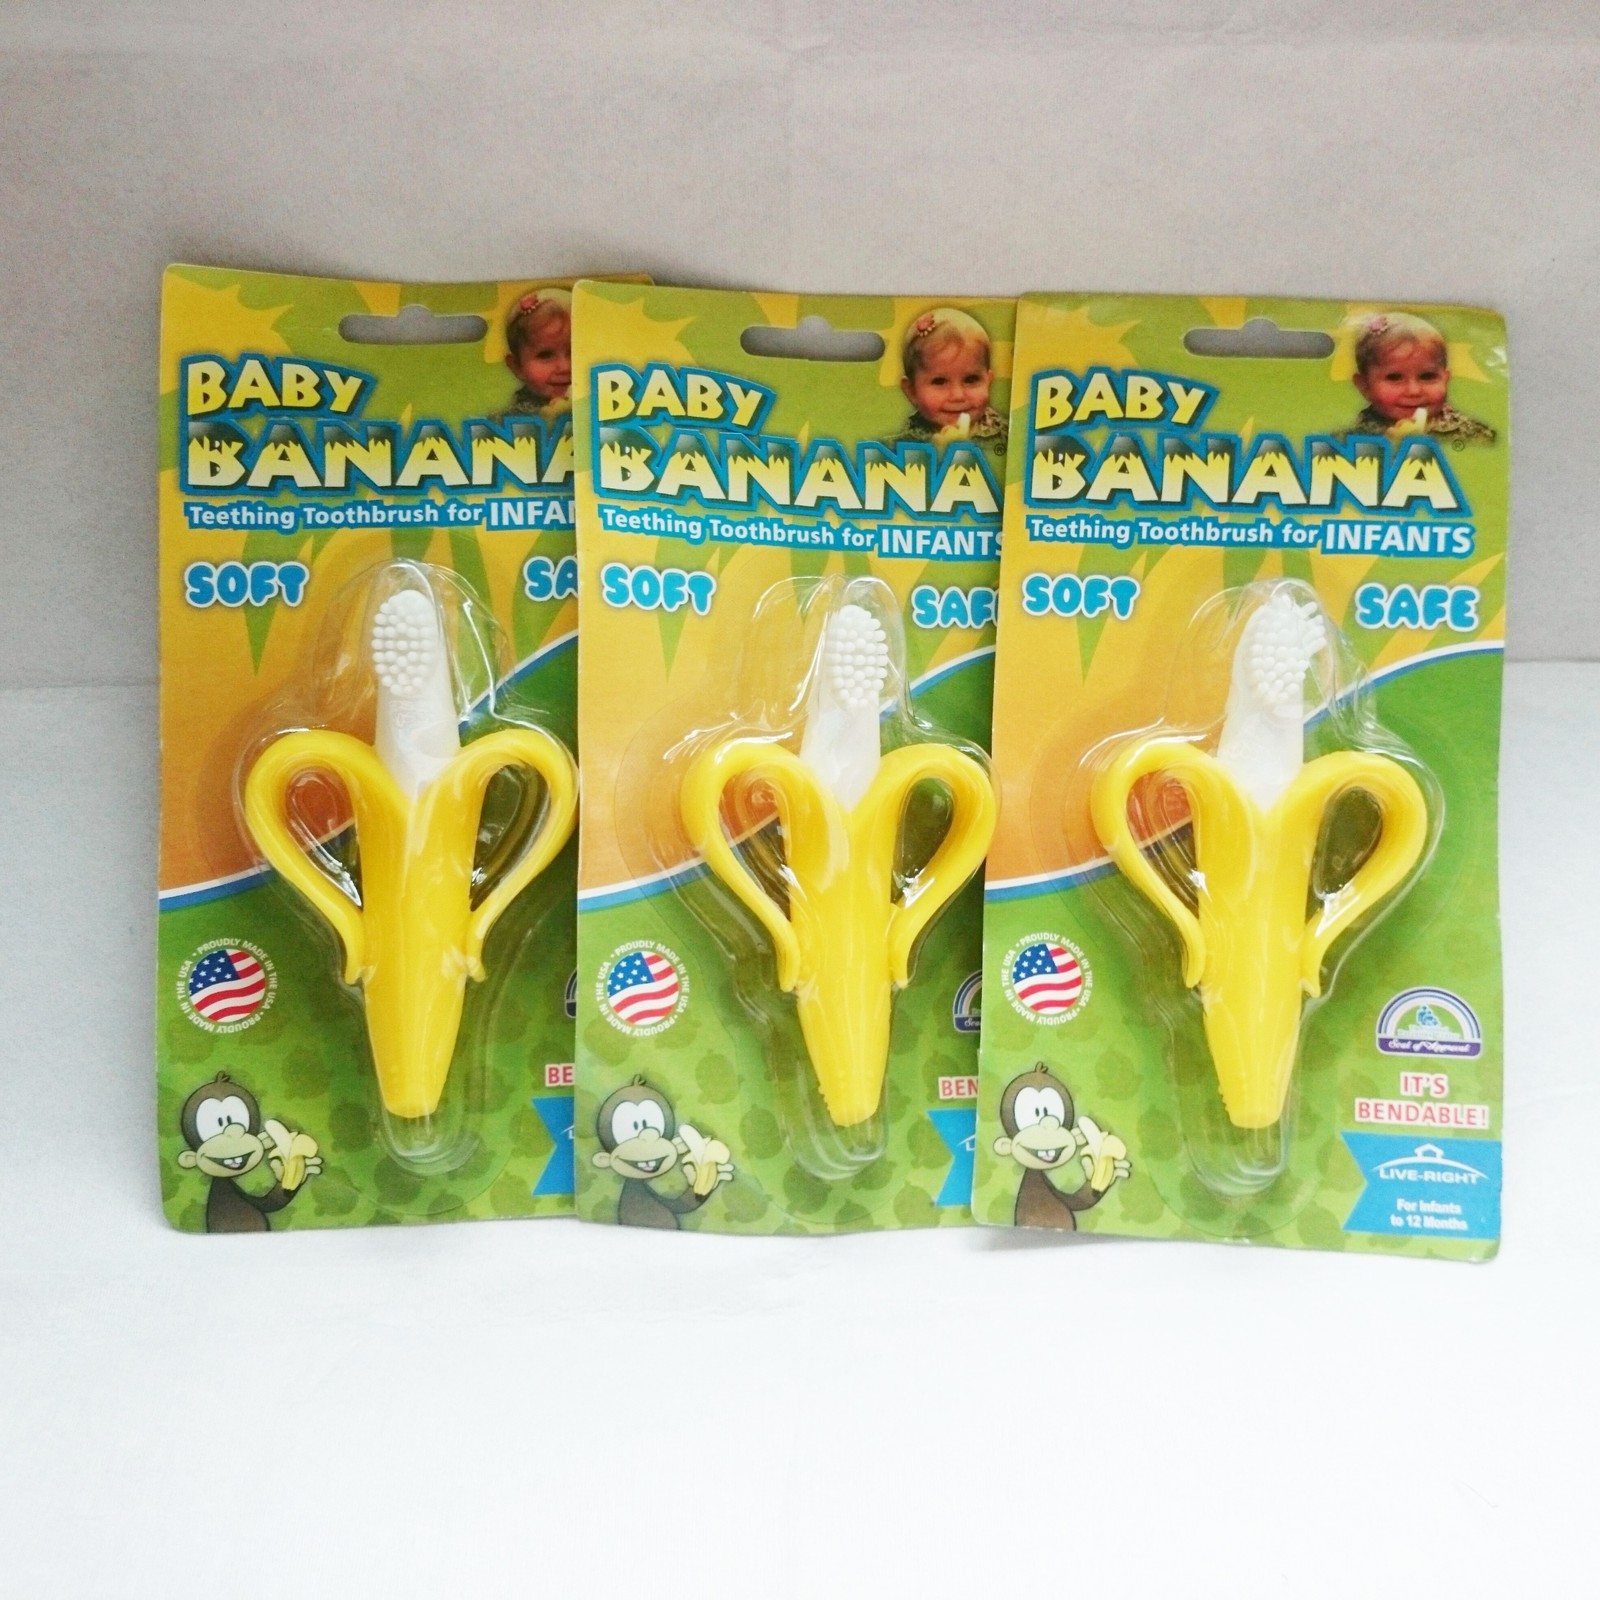 Baby Banana - Dental care 0-24month baby kids health care safe soft top quality creative gifts